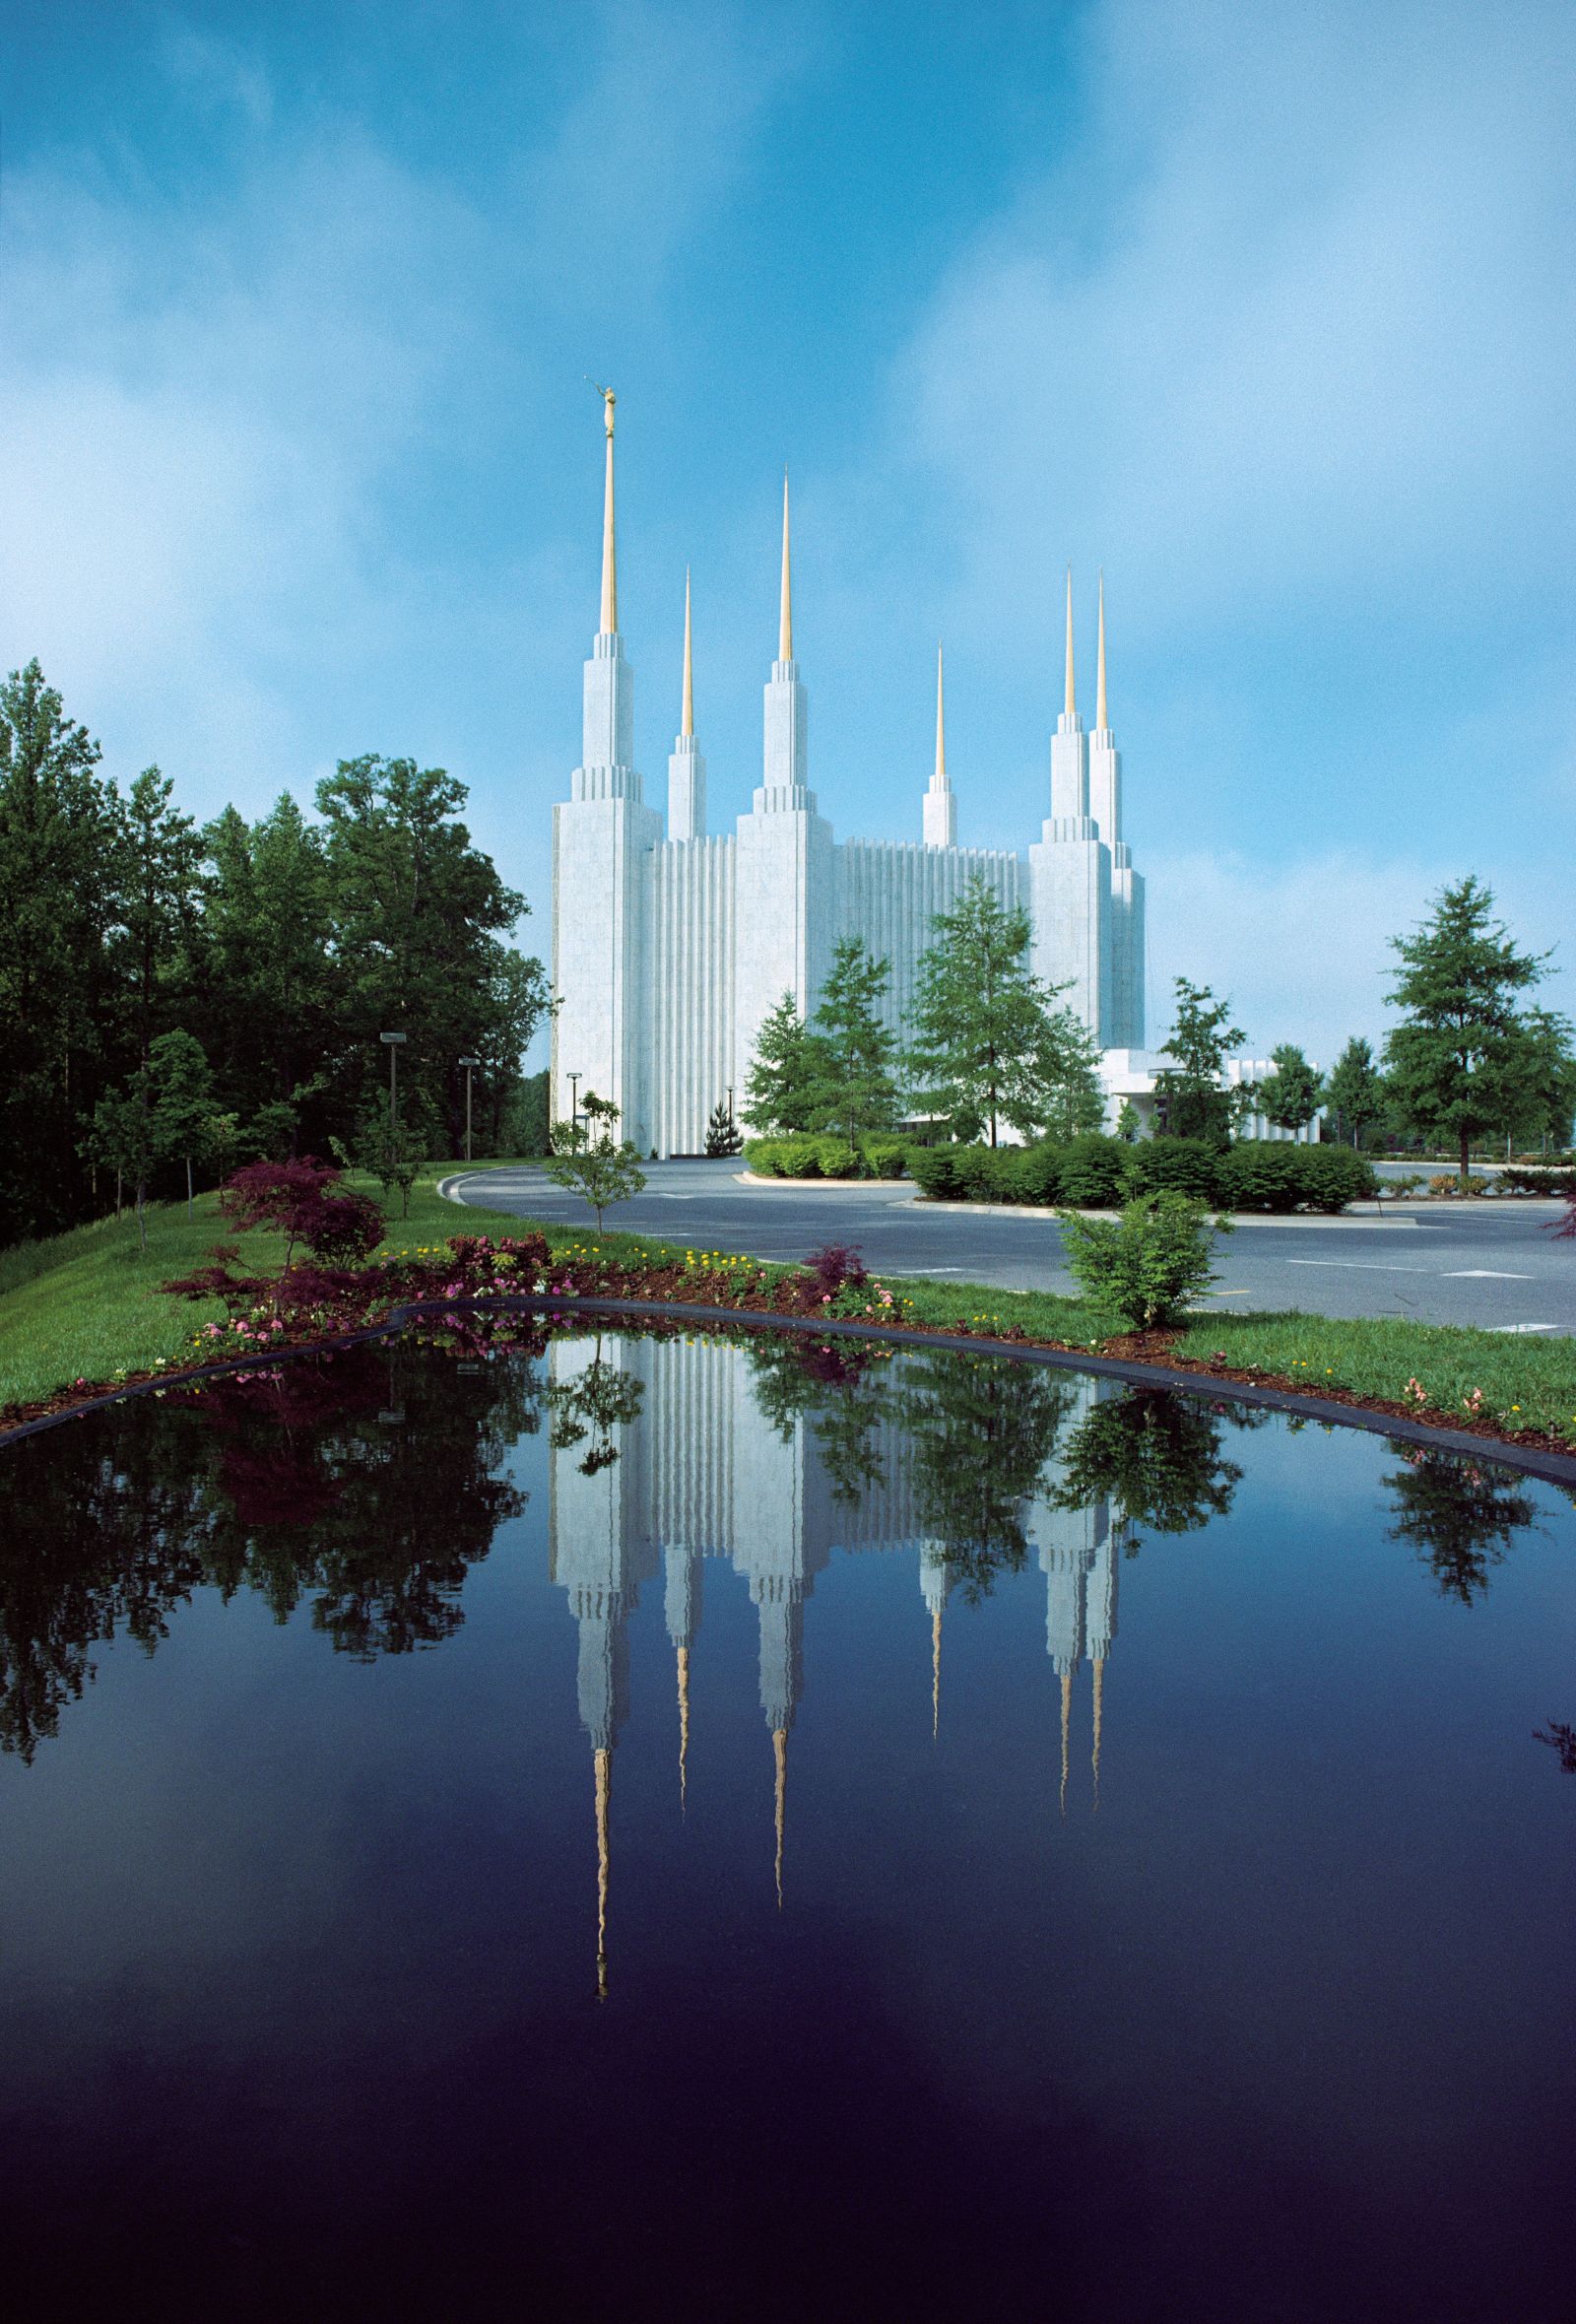 The D.C. Temple in the distance, the spires reach into the sky,. The  reflection of the temple and the surrounding trees is  is in the foreground.